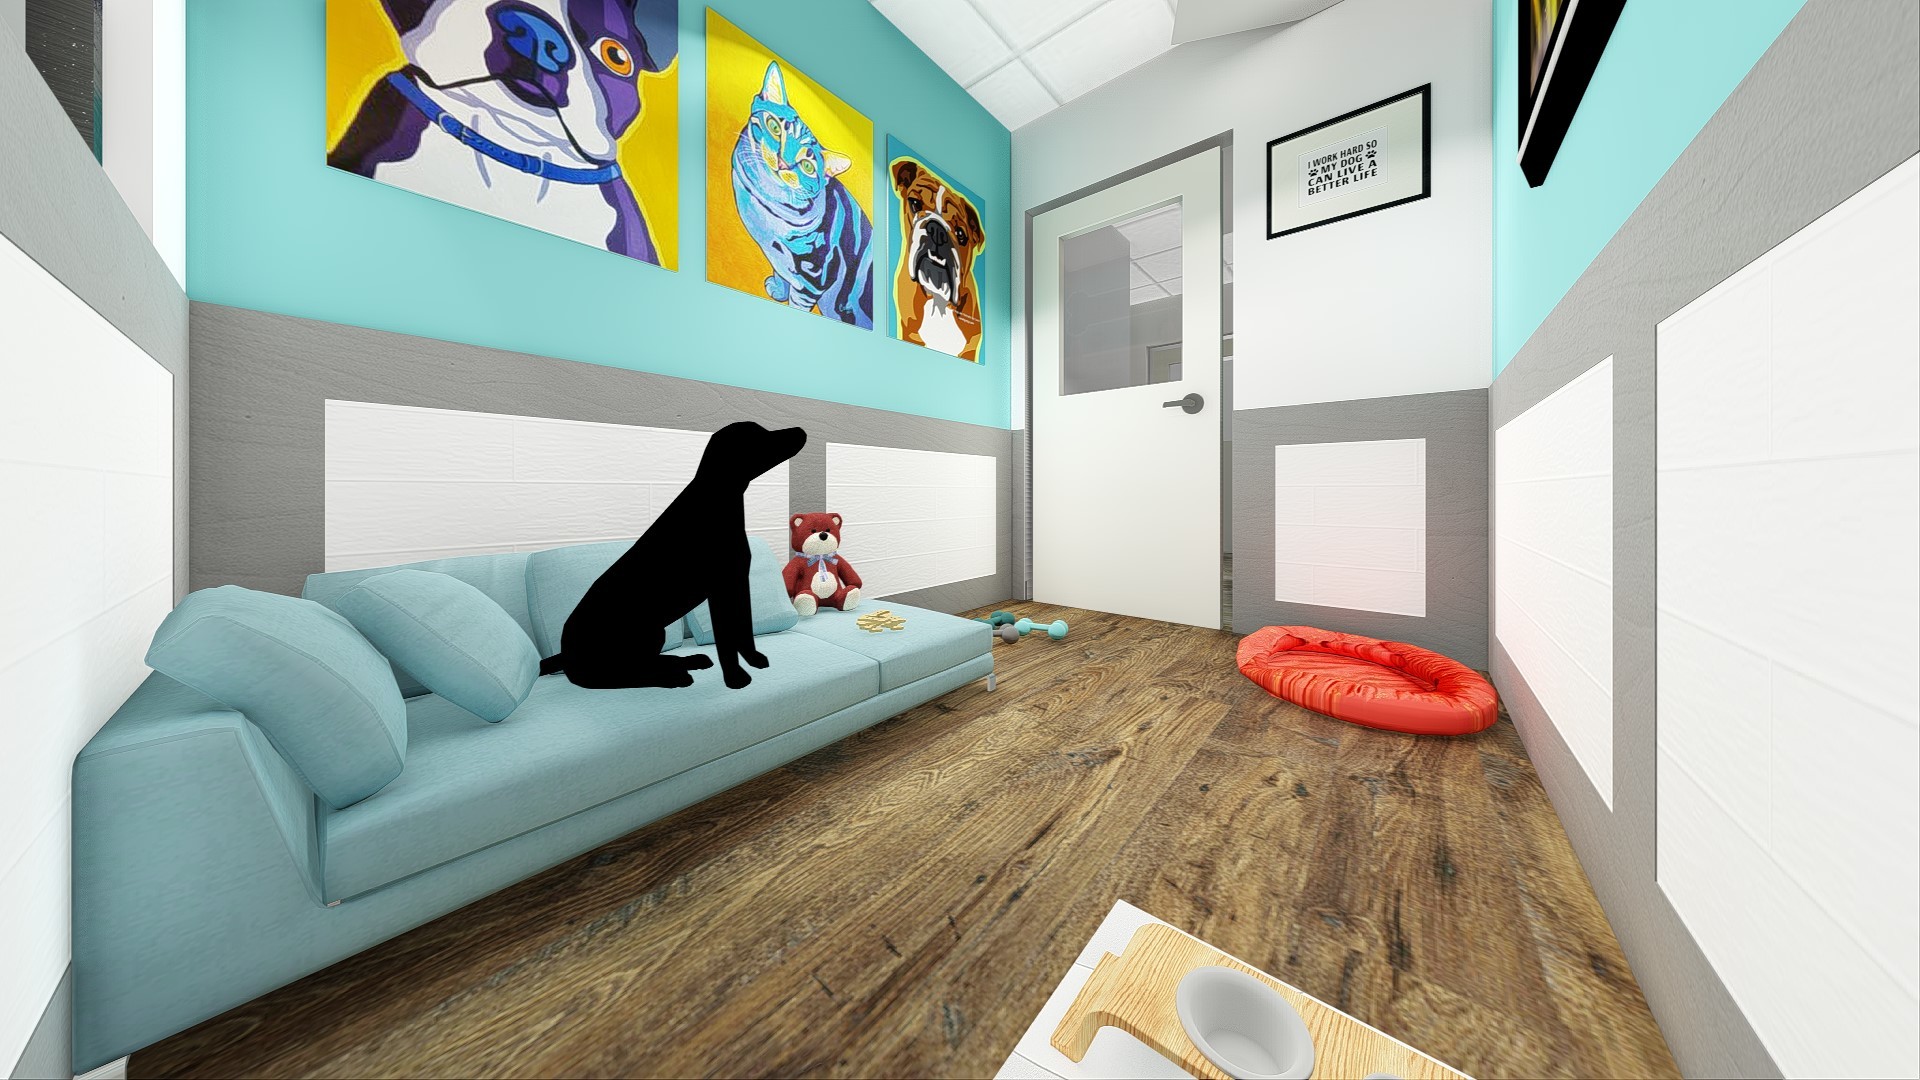 The prototype includes VIP rooms for dogs with plush beds and webcams so that owners can monitor their pets remotely.